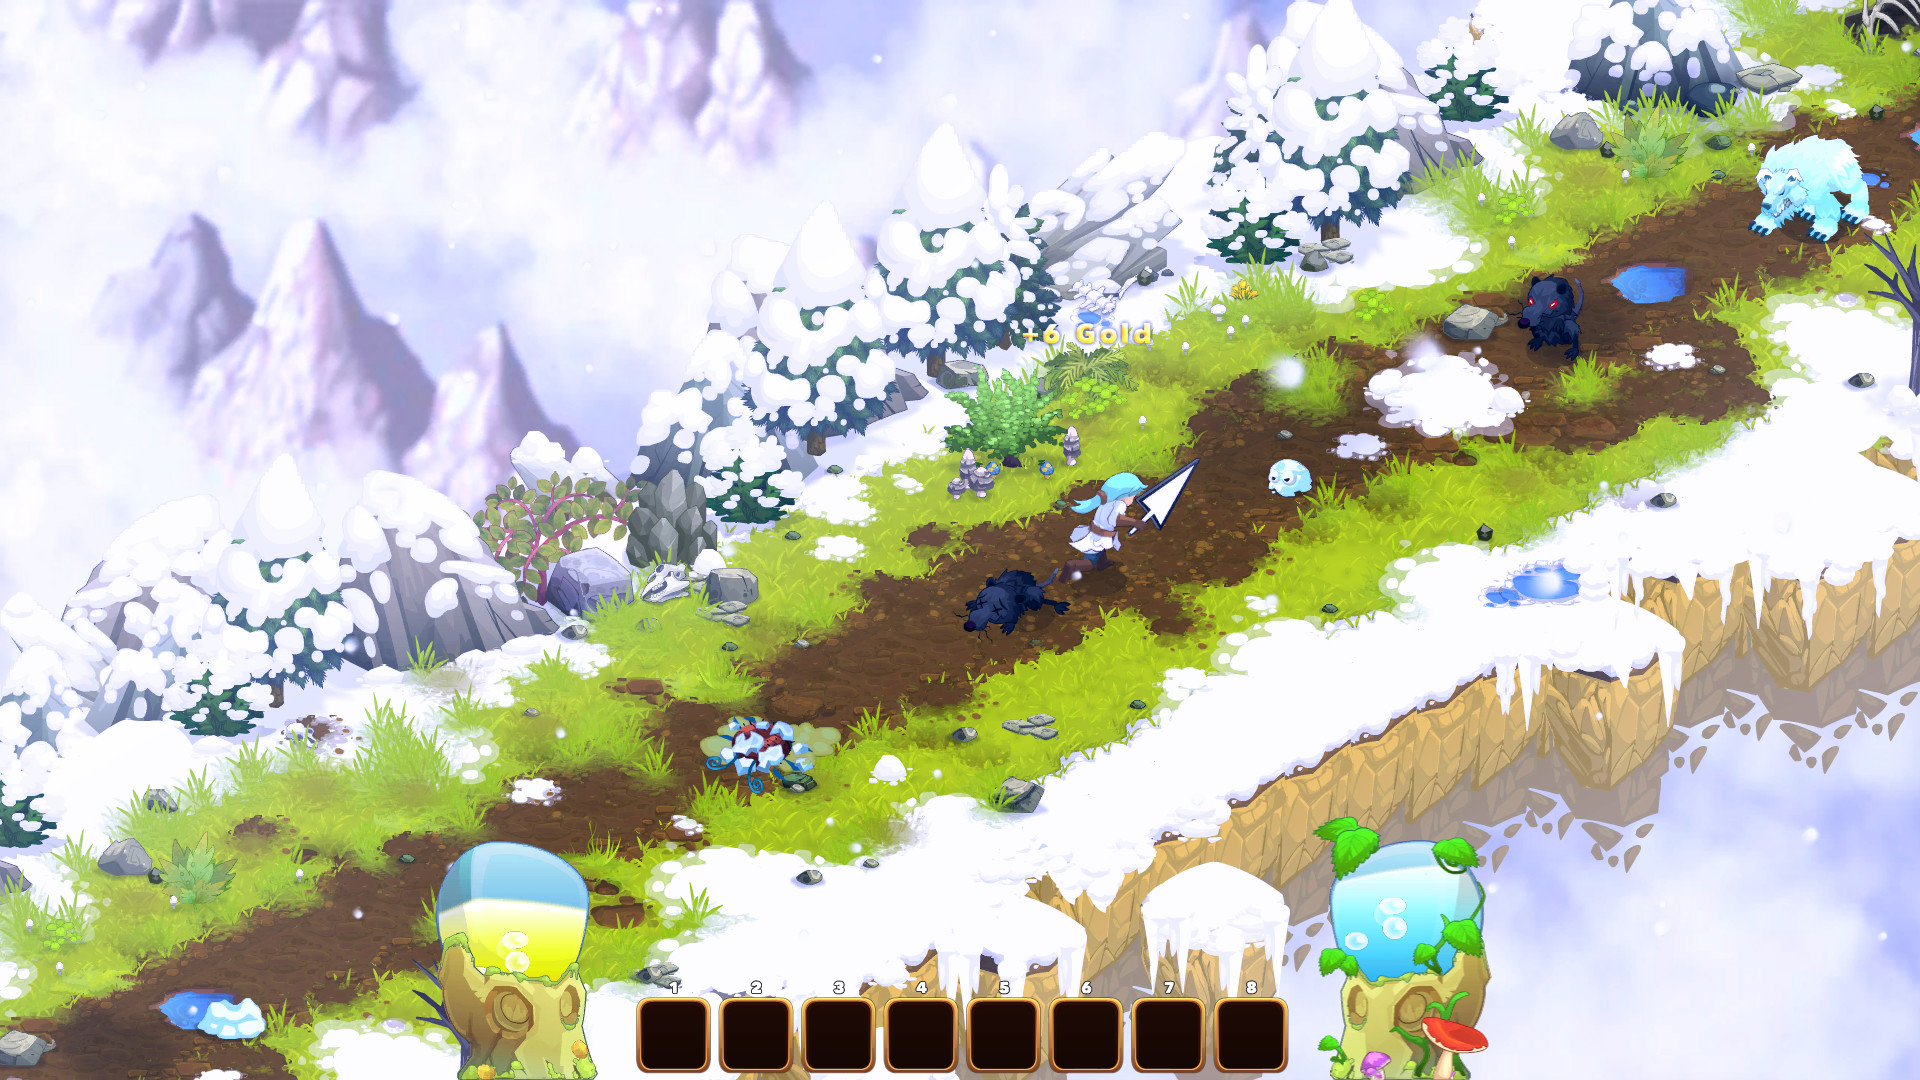 Clicker Heroes 2 Beta Test Shows Off Latest Hero and Skills